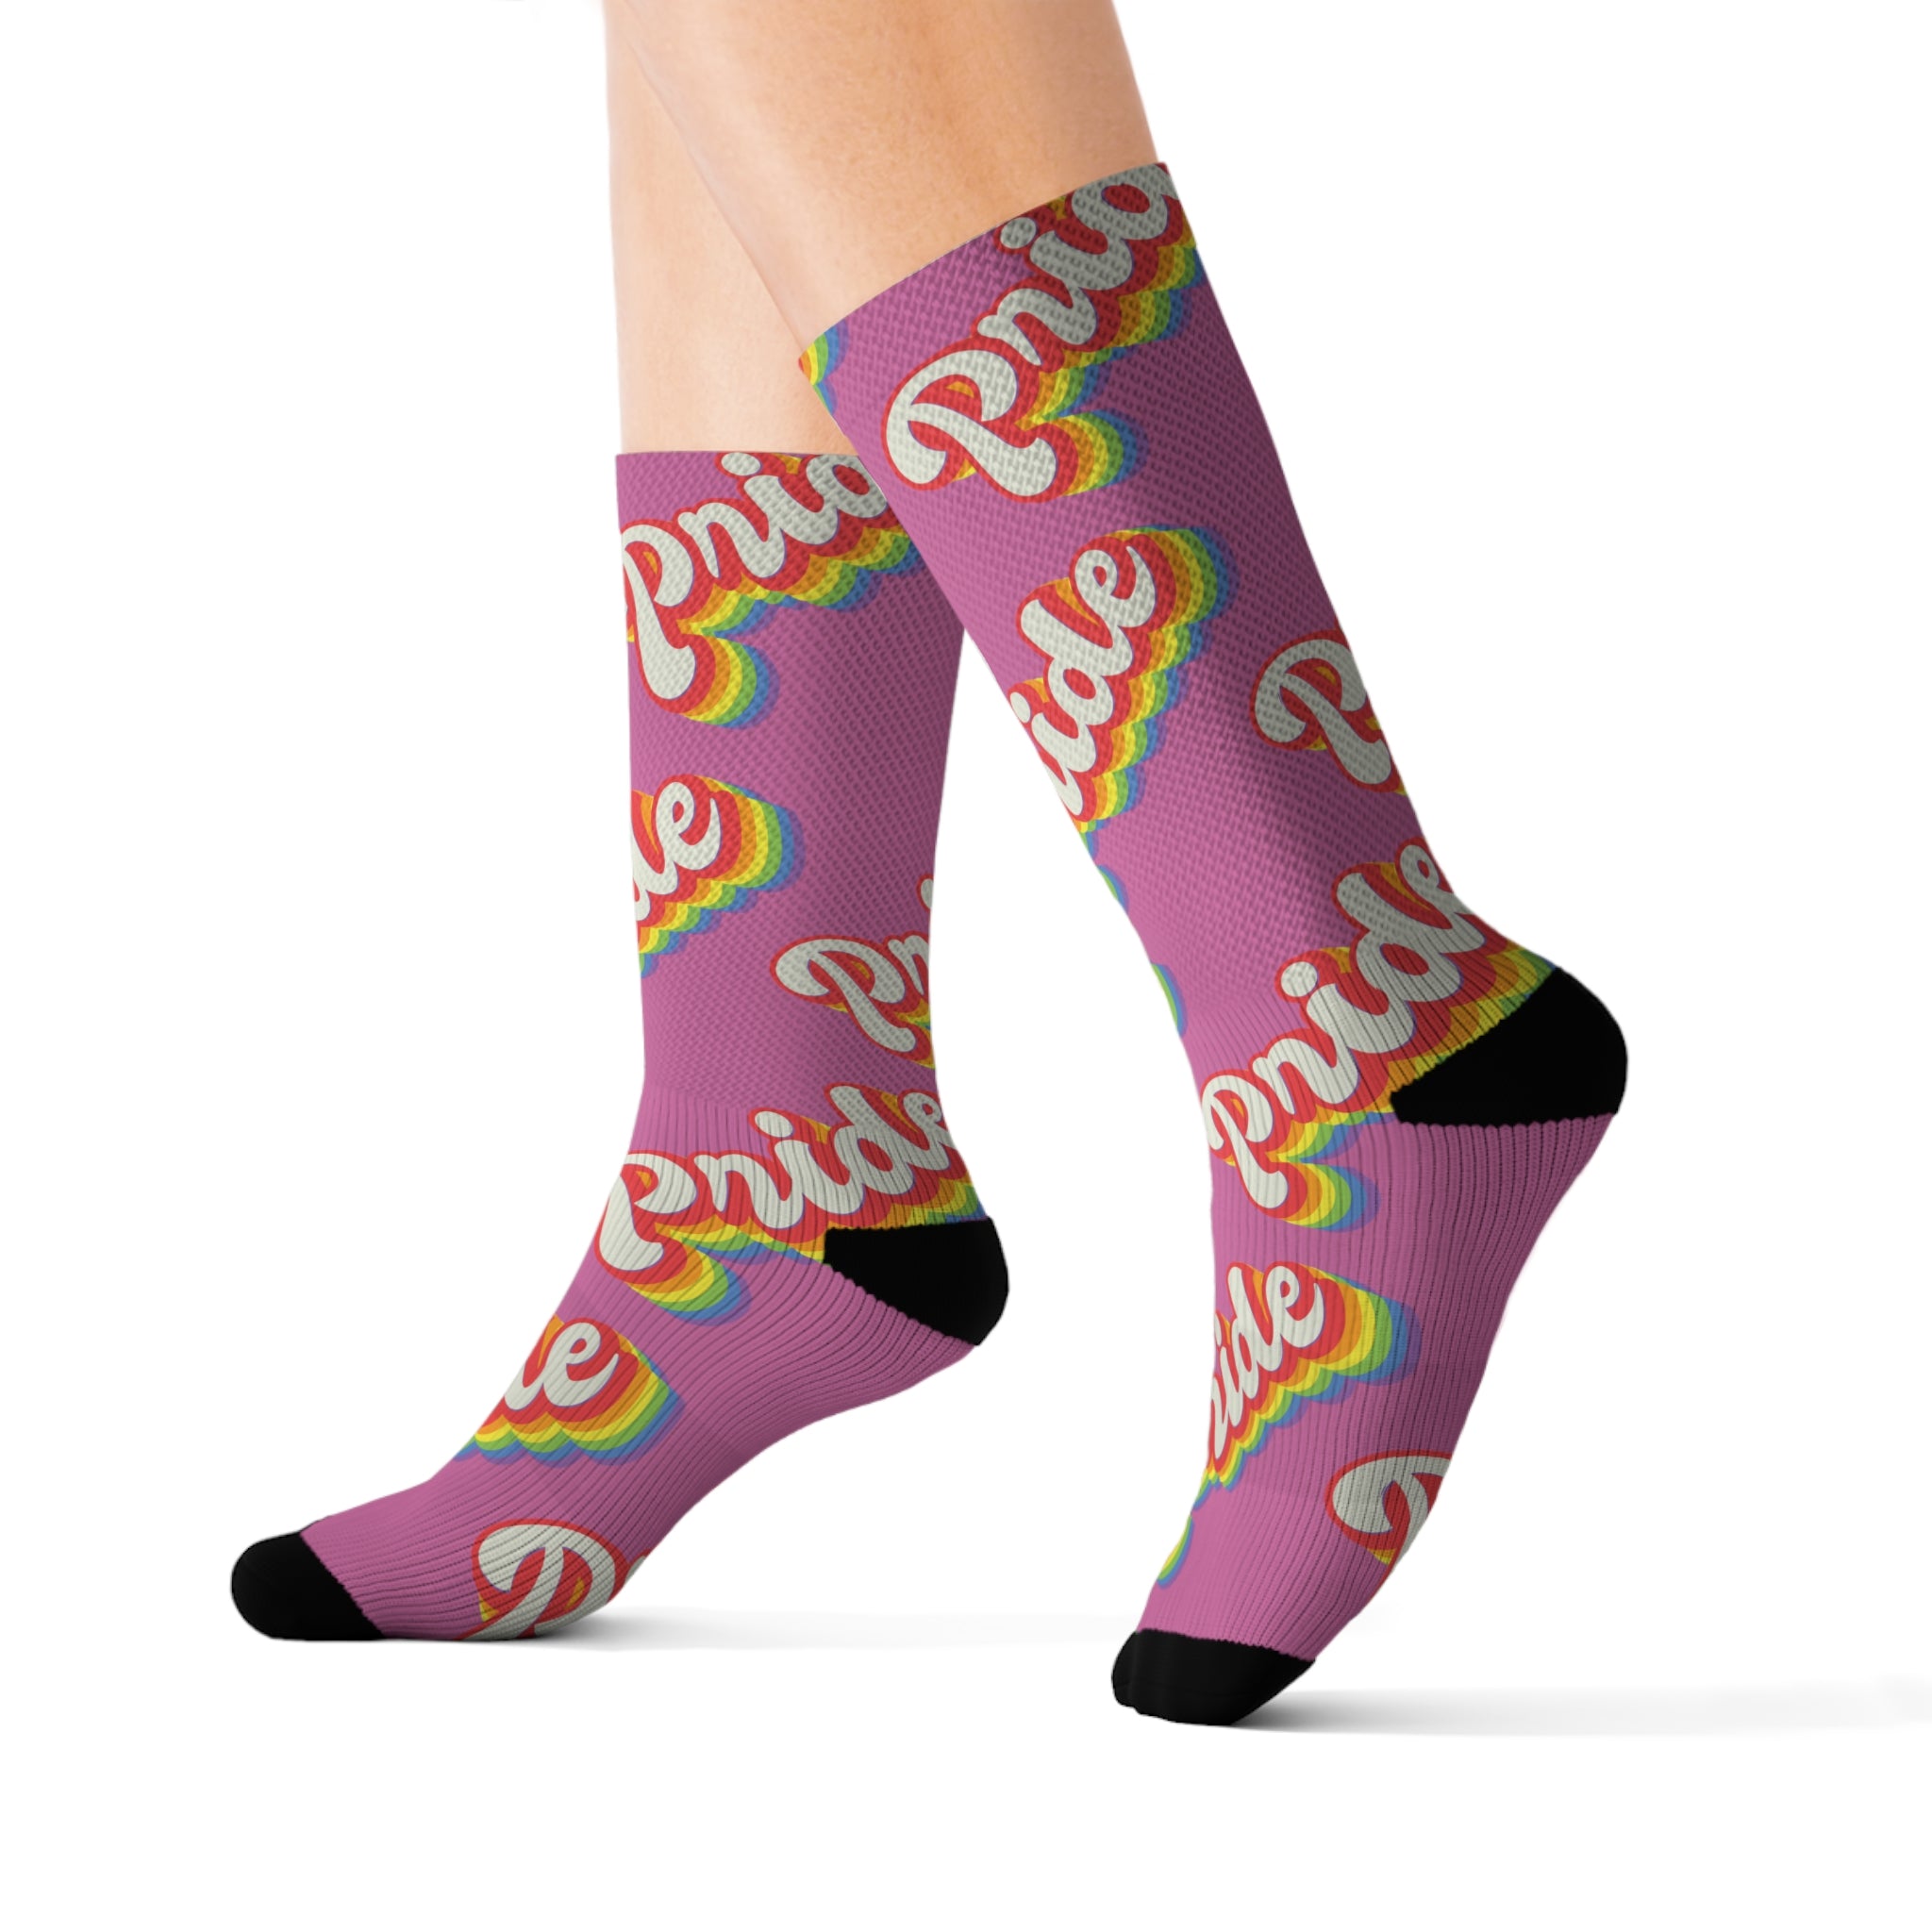 A woman showcasing her pride with a Pride Socks sublimated print on her comfortable socks.